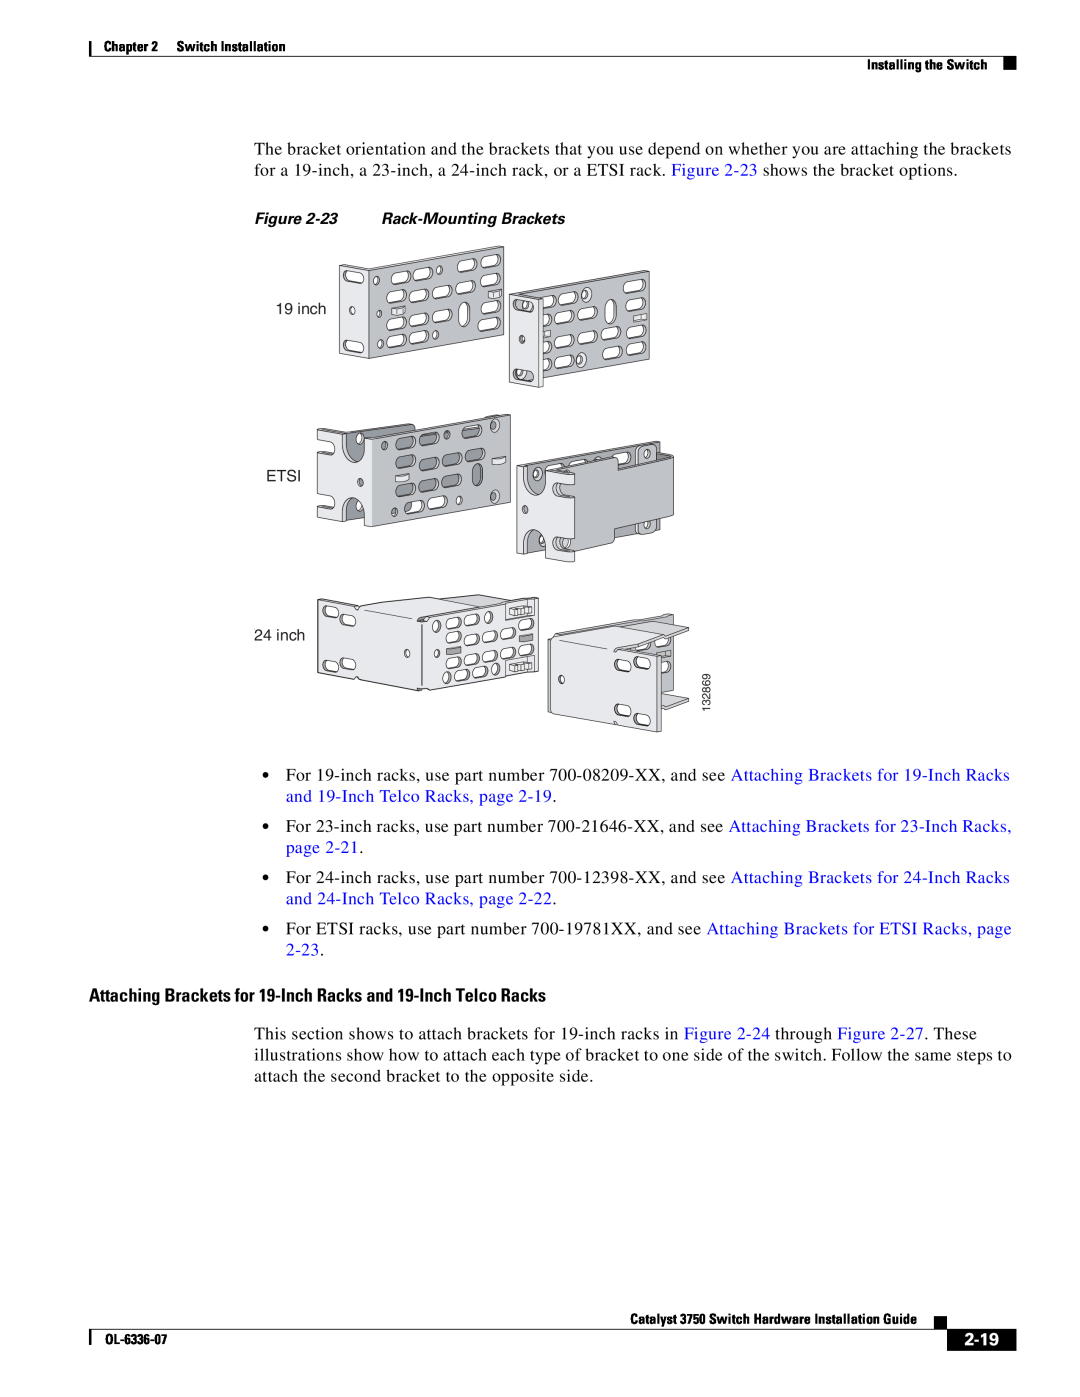 Cisco Systems WSC3750X24TS Attaching Brackets for 19-Inch Racks and 19-Inch Telco Racks, 2-19, 23 Rack-Mounting Brackets 